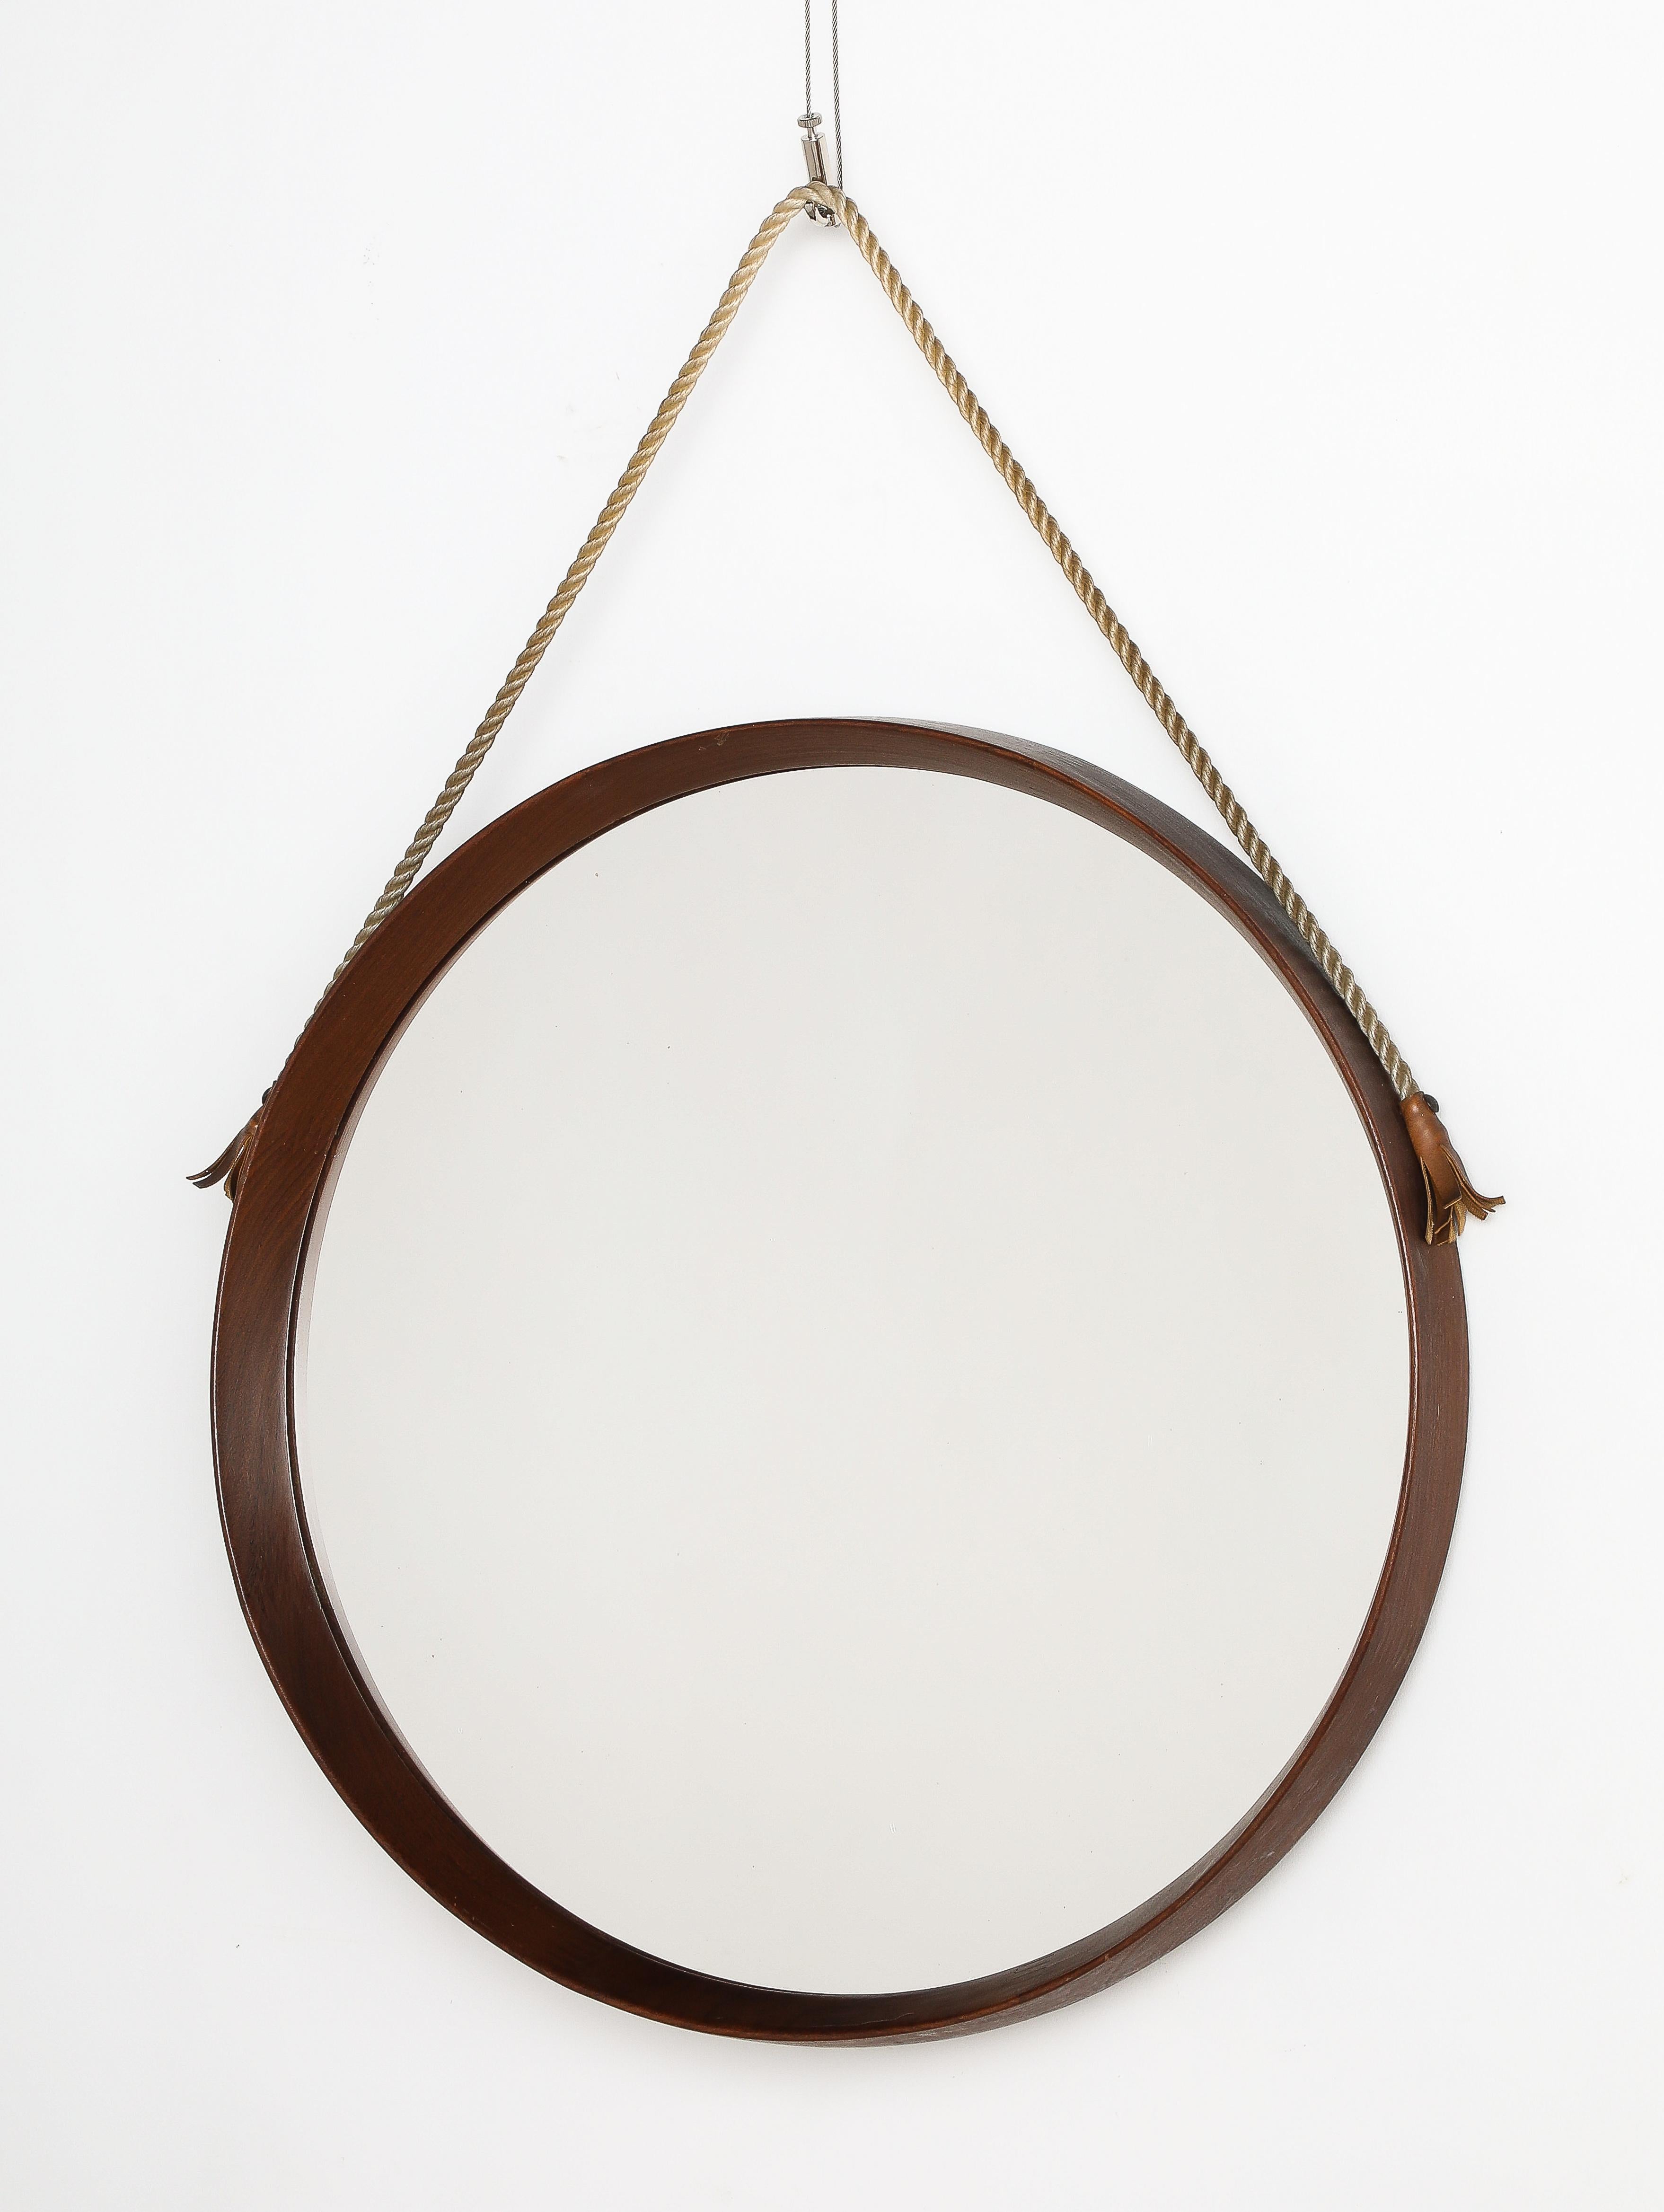 A charming Italian modernist circular teak hanging wall mirror with rope strap adhered to the frame with leather tassels.  
Italy, circa 1960 
Size: 20